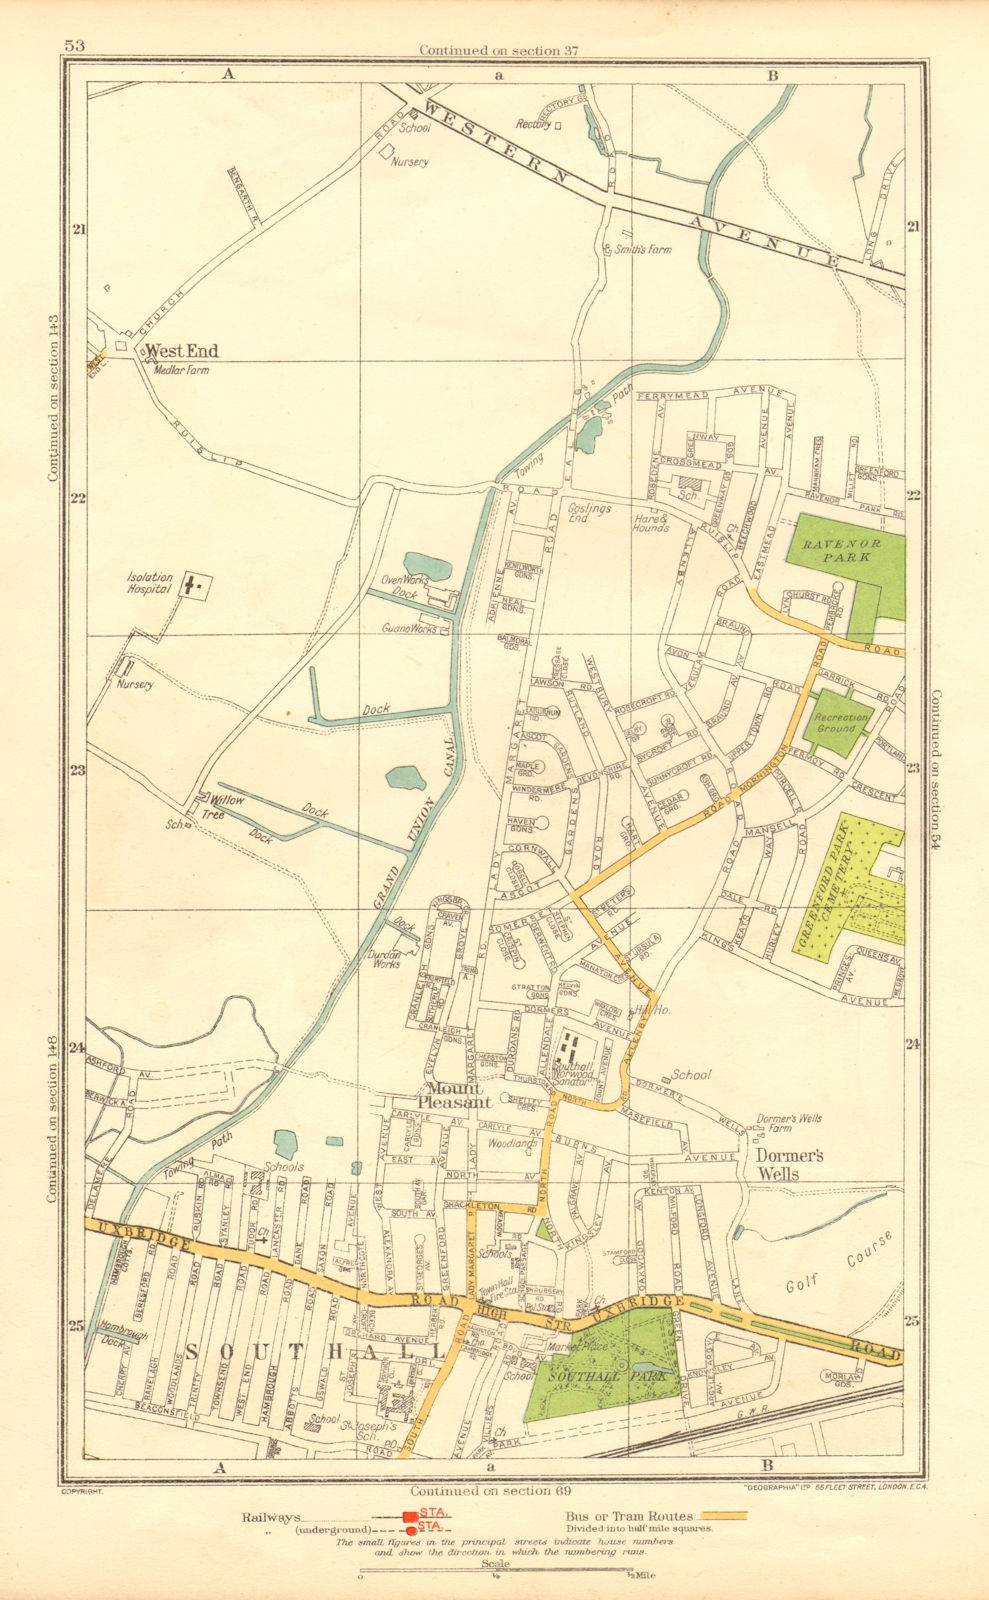 MIDDLESEX. Dormer's Wells Mount Pleasant Southall West End 1937 old map